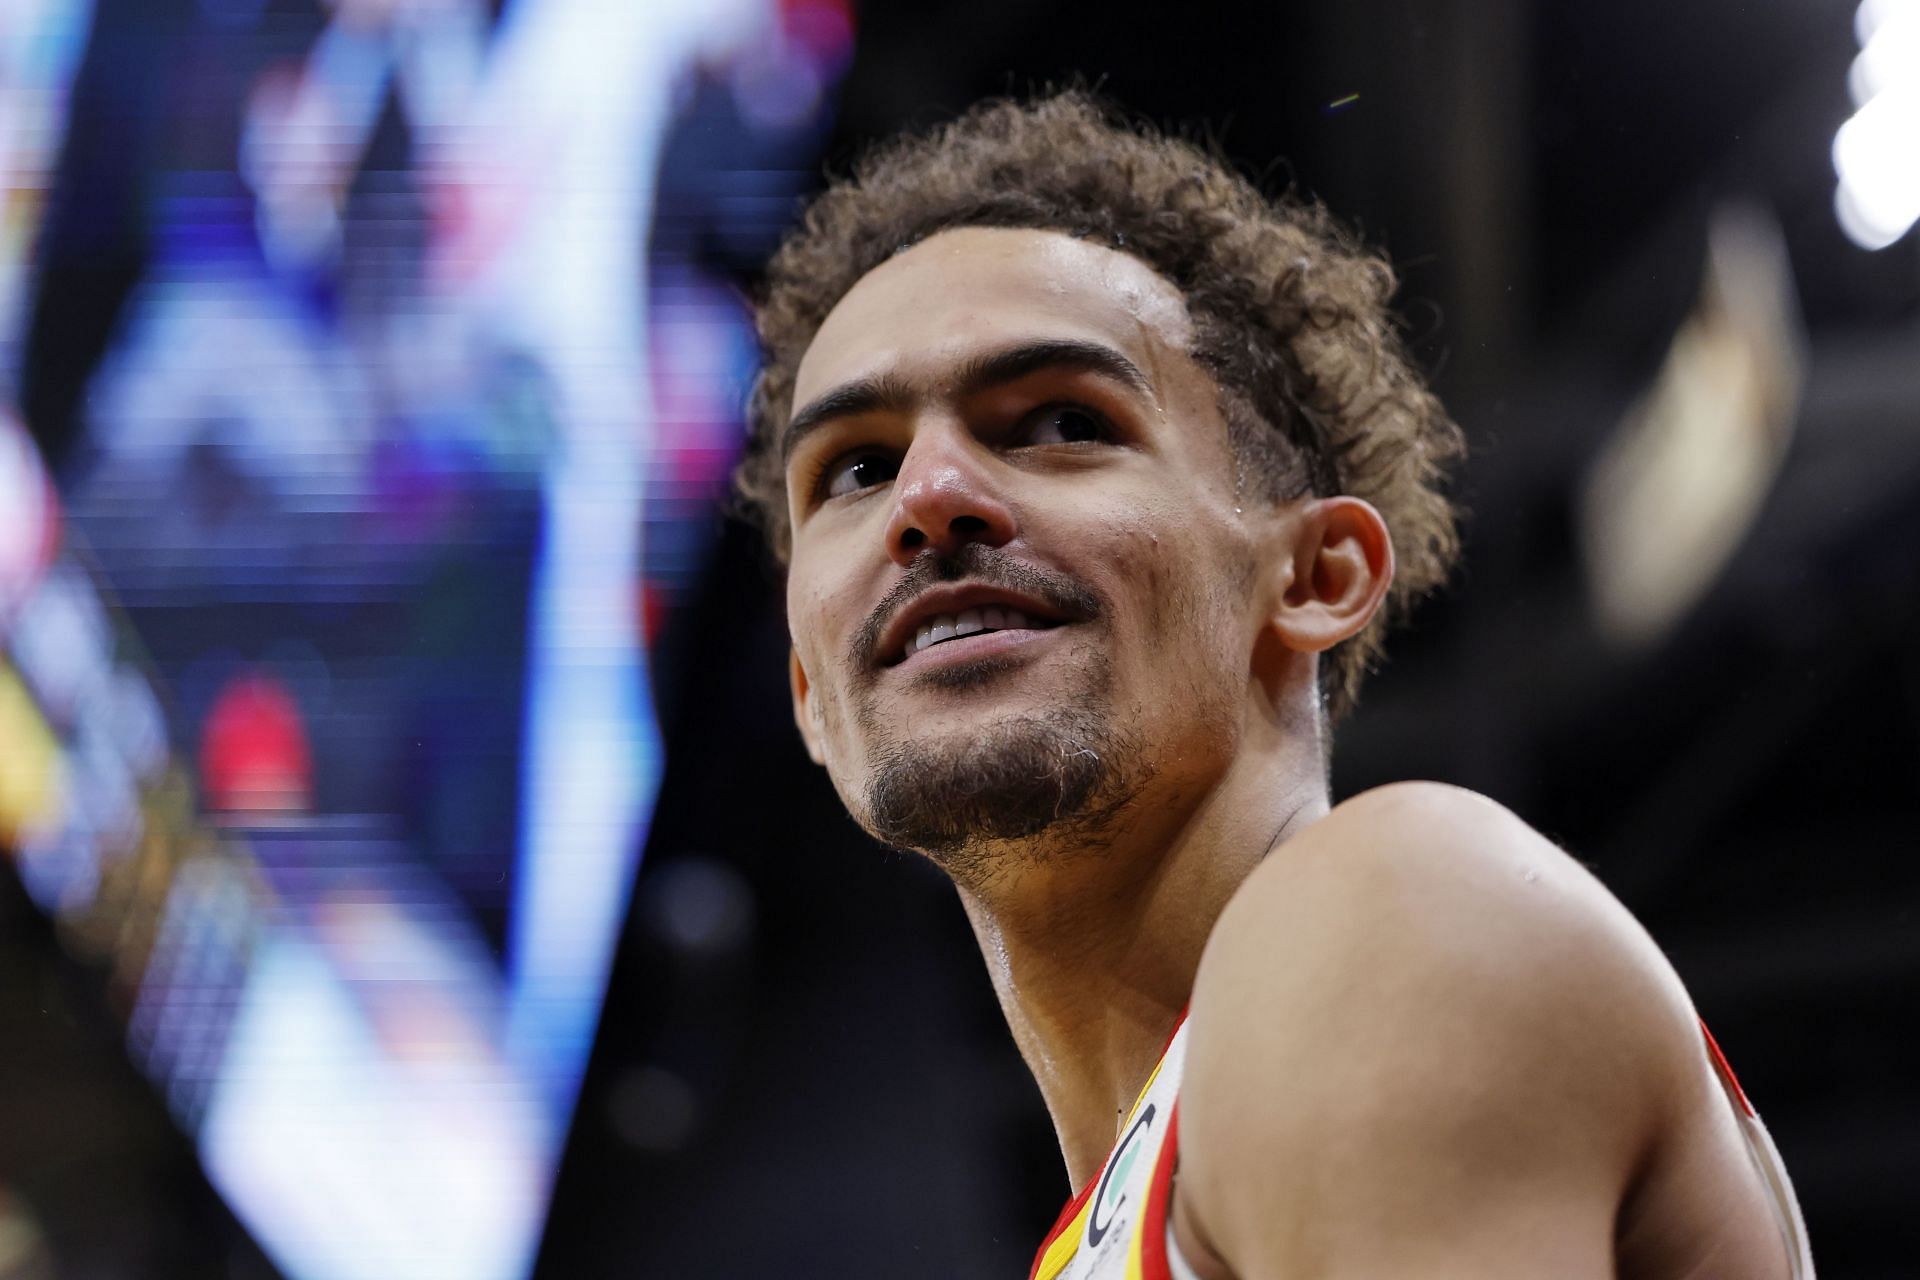 Trae Young scored 38 points in the play-in game against the Cleveland Cavaliers